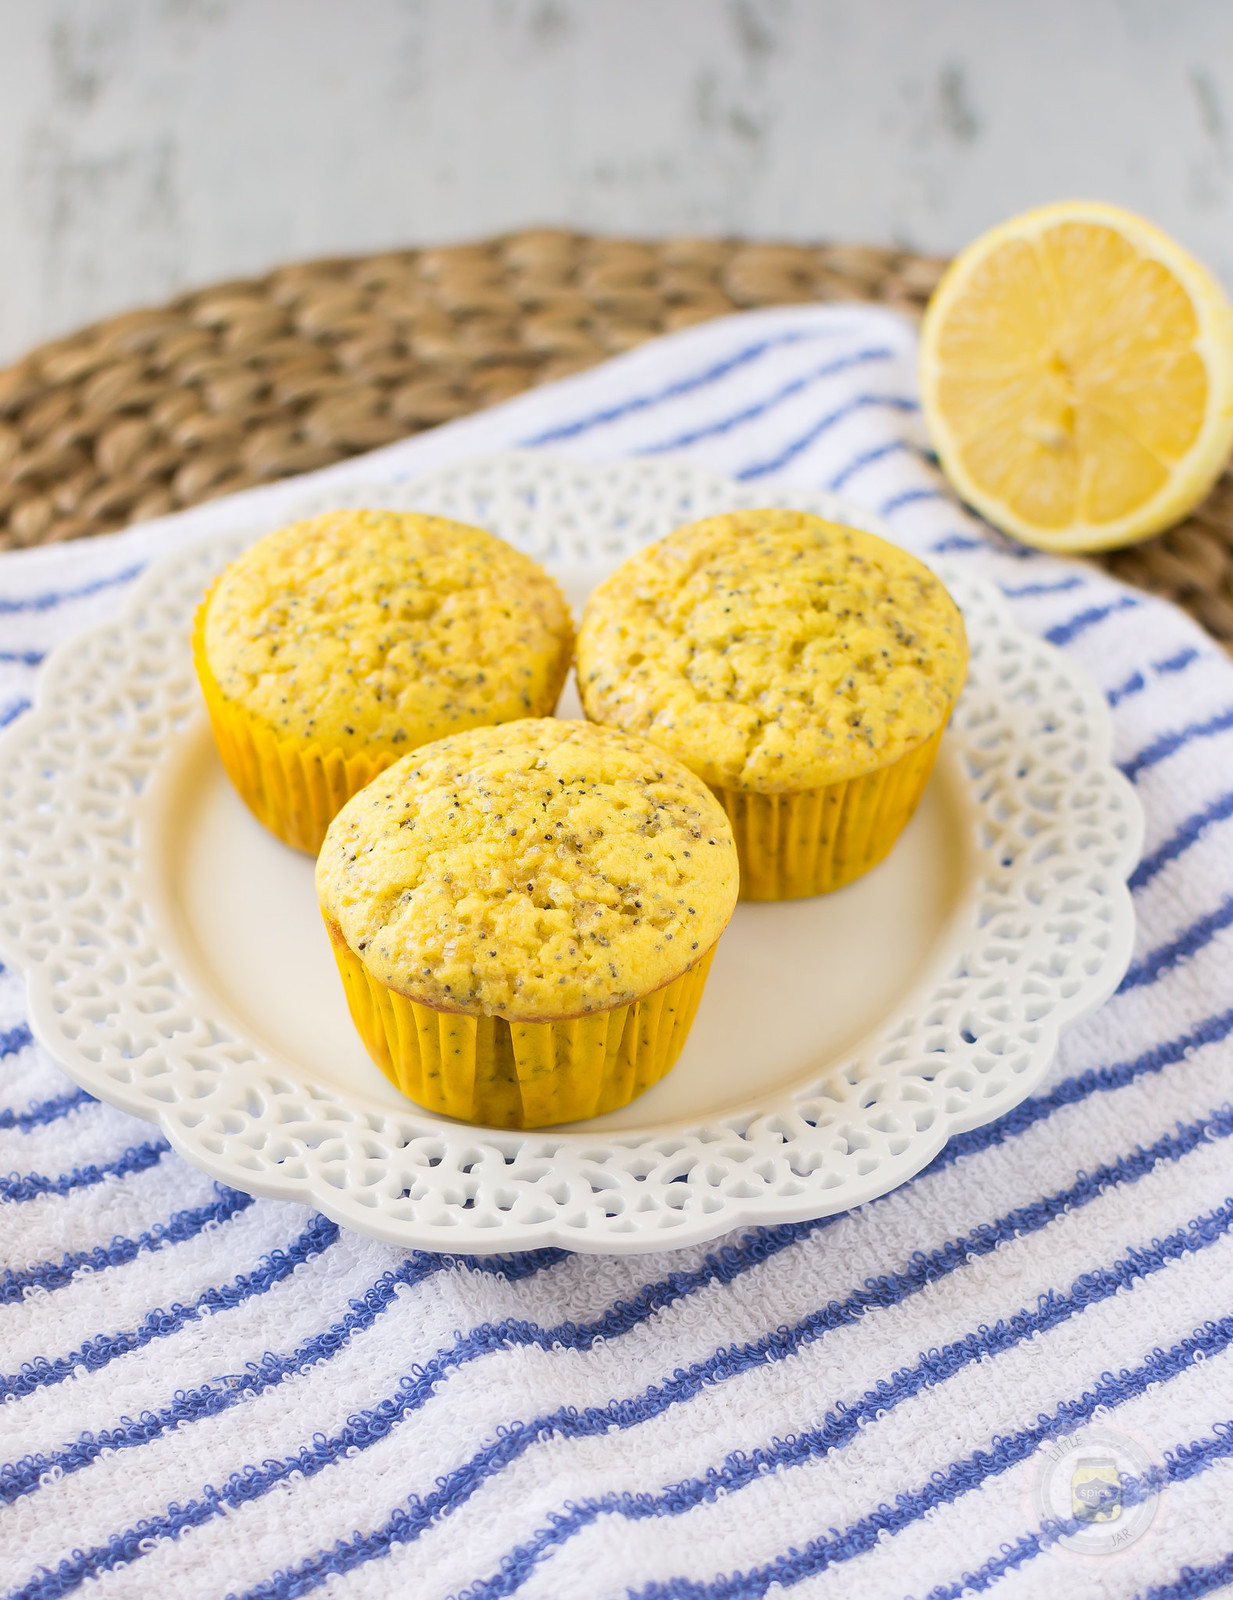 three lemon poppy seed muffins on doily plate on striped hand towel